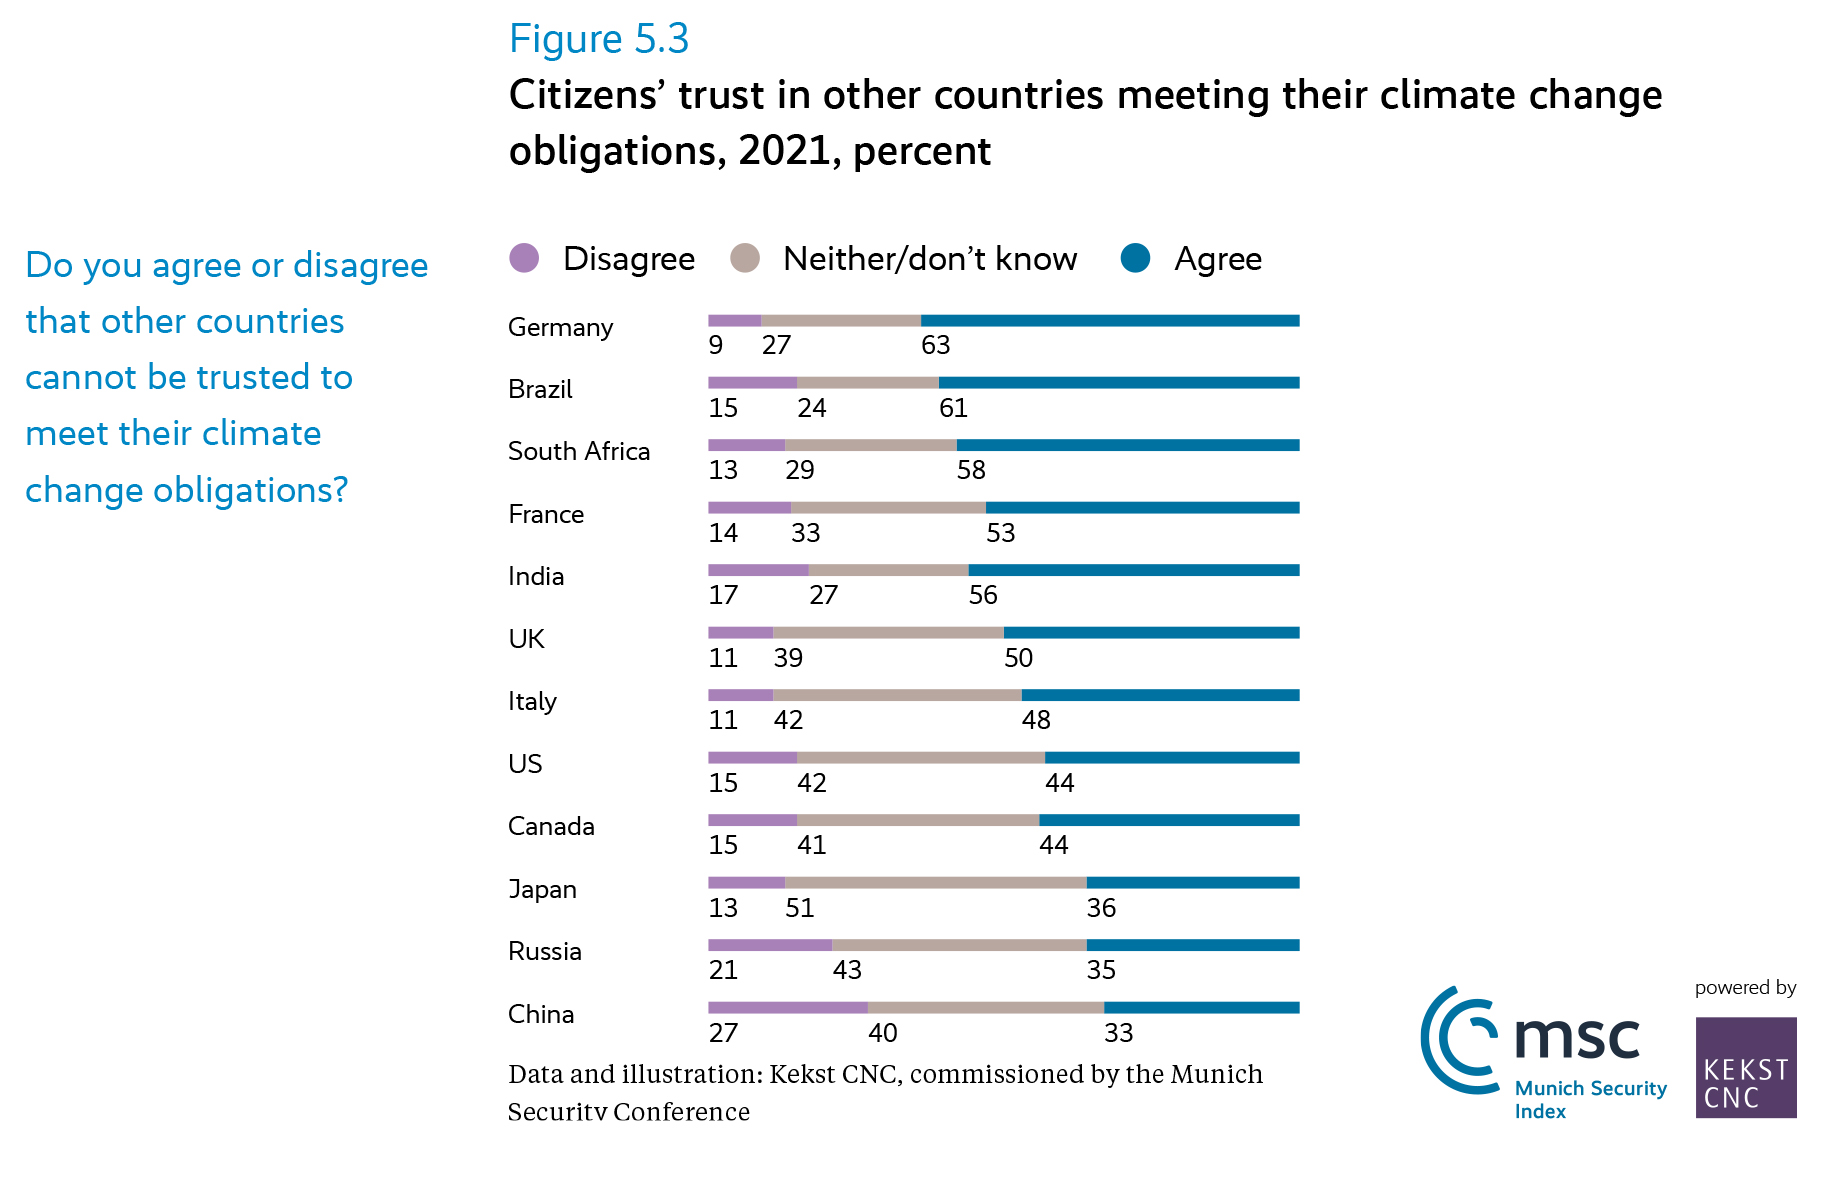 210602_MSR_Figure_5-3_Climate_Change_Trust_In_Other_Countries.jpg